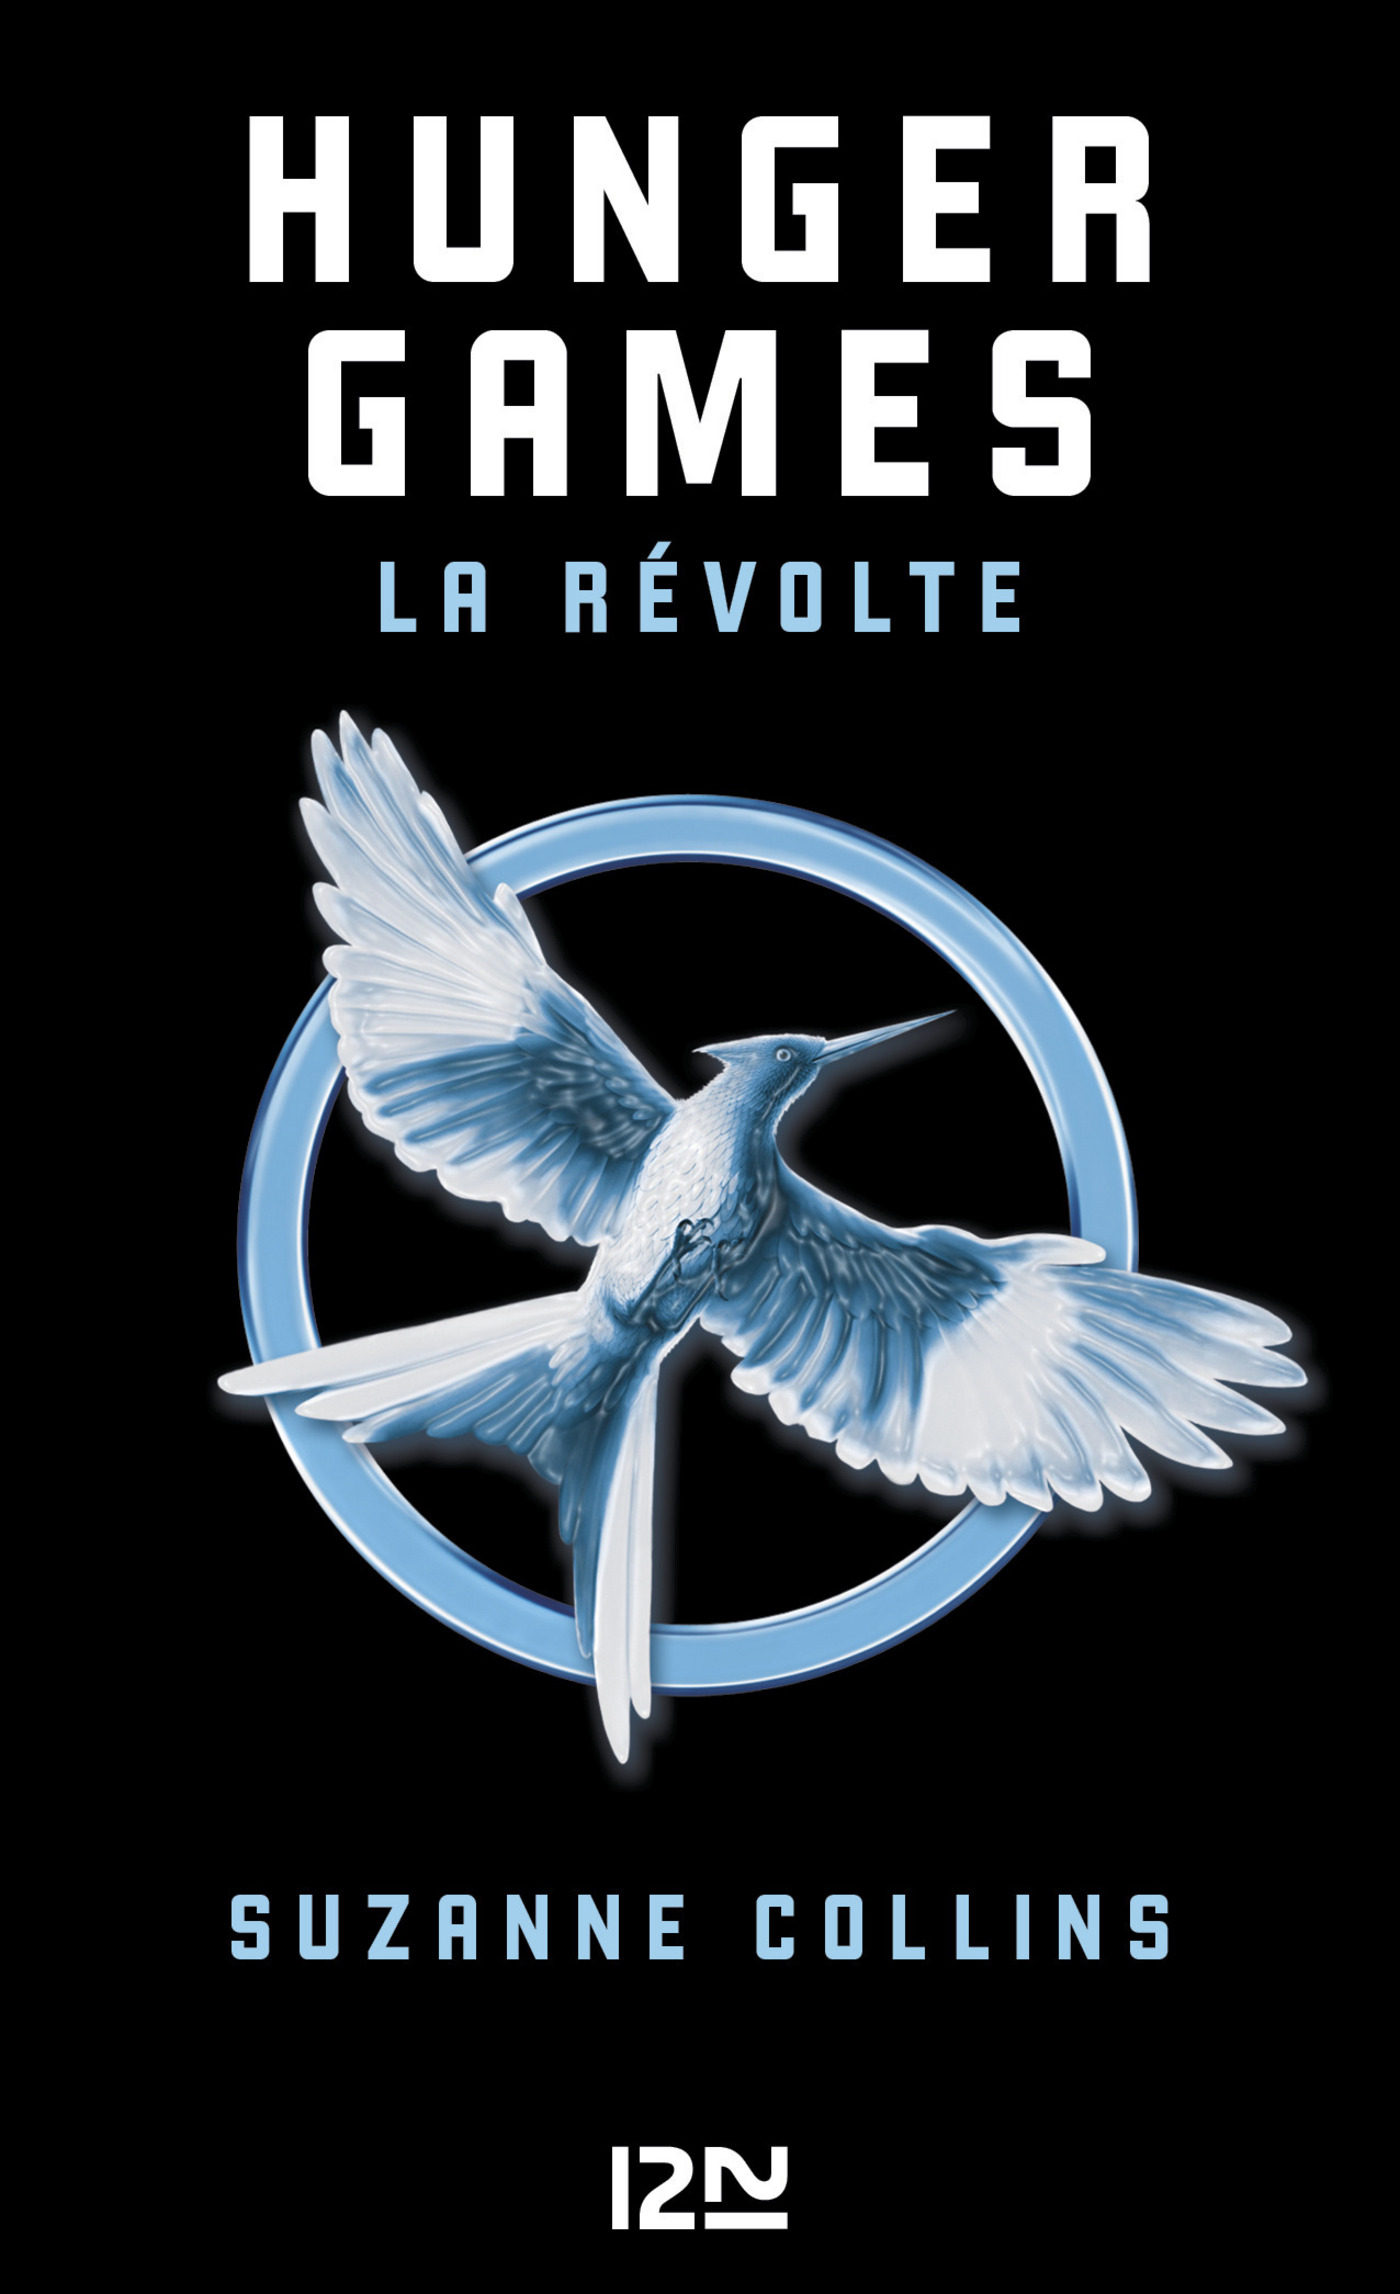 The hunger games book 3 free pdf download